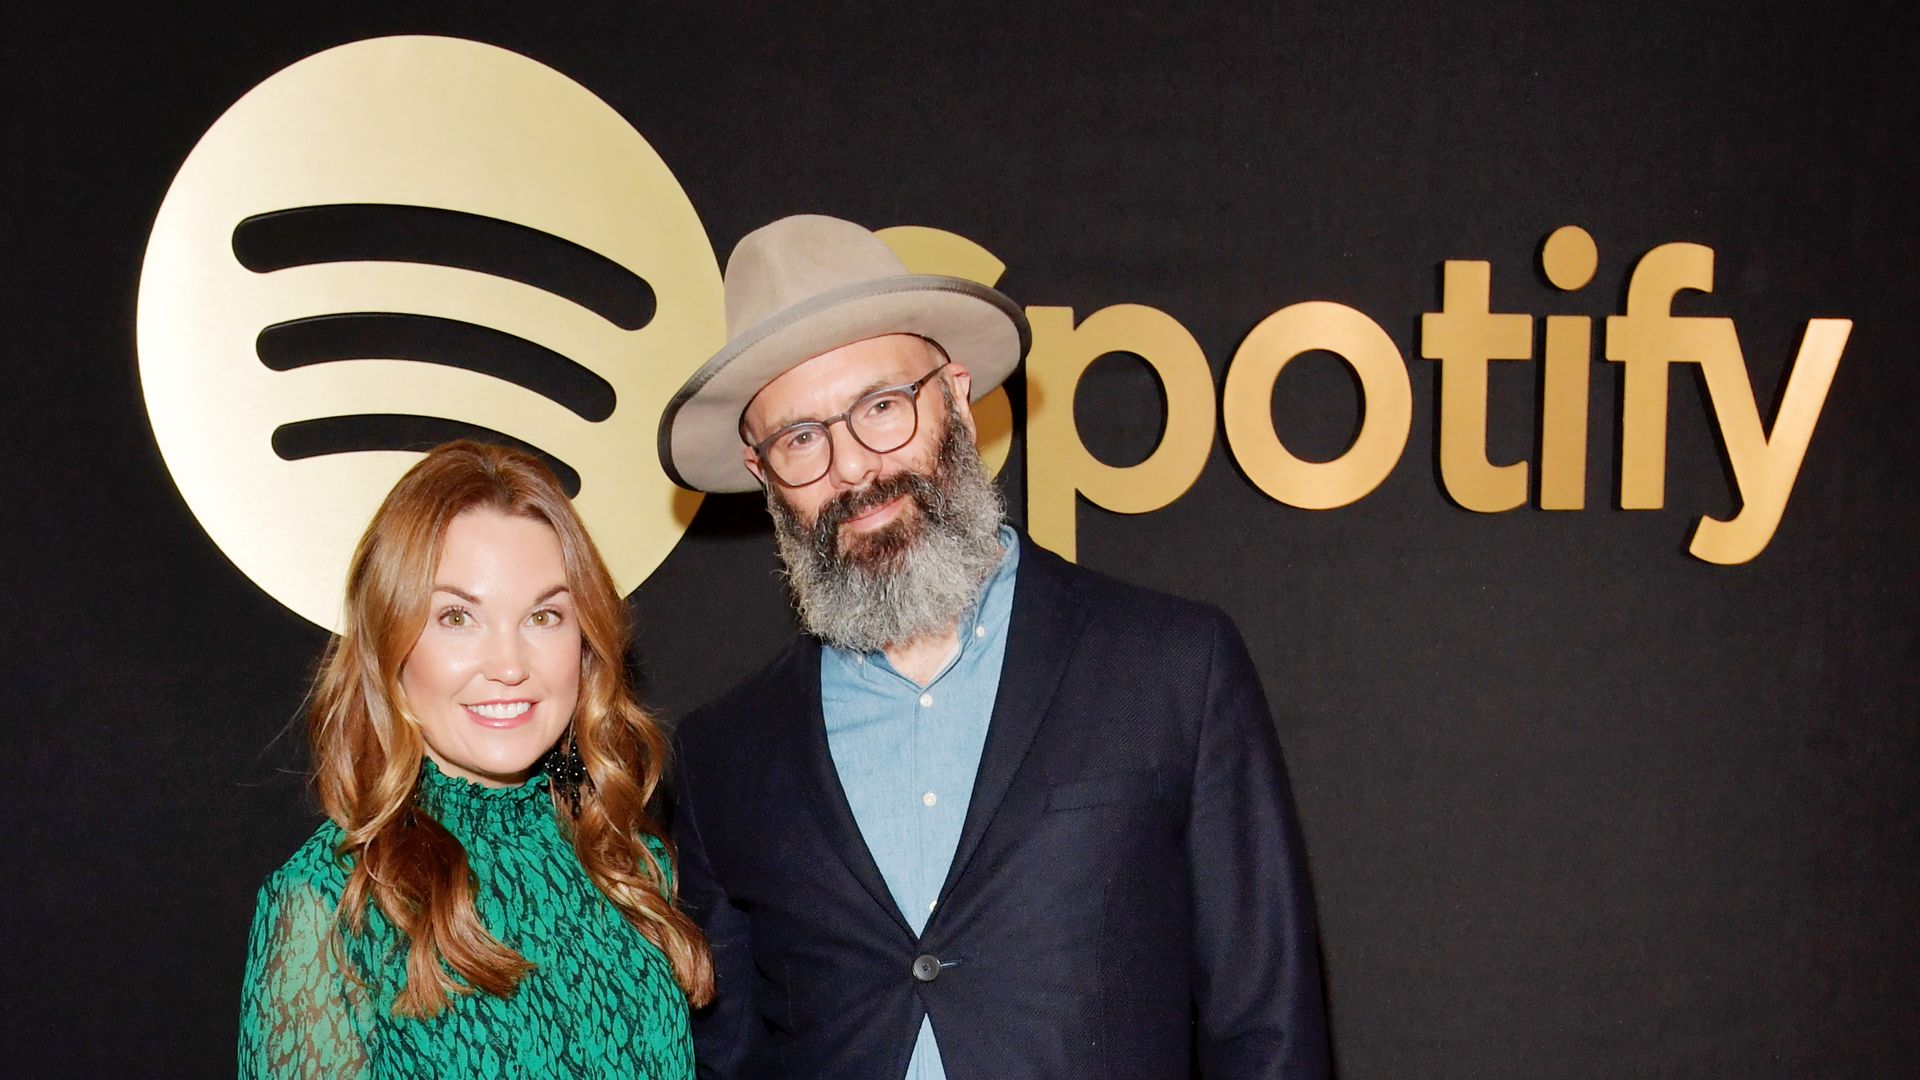 Spotify Head Of Global Communications and Public Relations Dustee Jenkins (L) and Spotify Head of Studios and Video Courtney Holt on November 20, 2019 in West Hollywood, California.